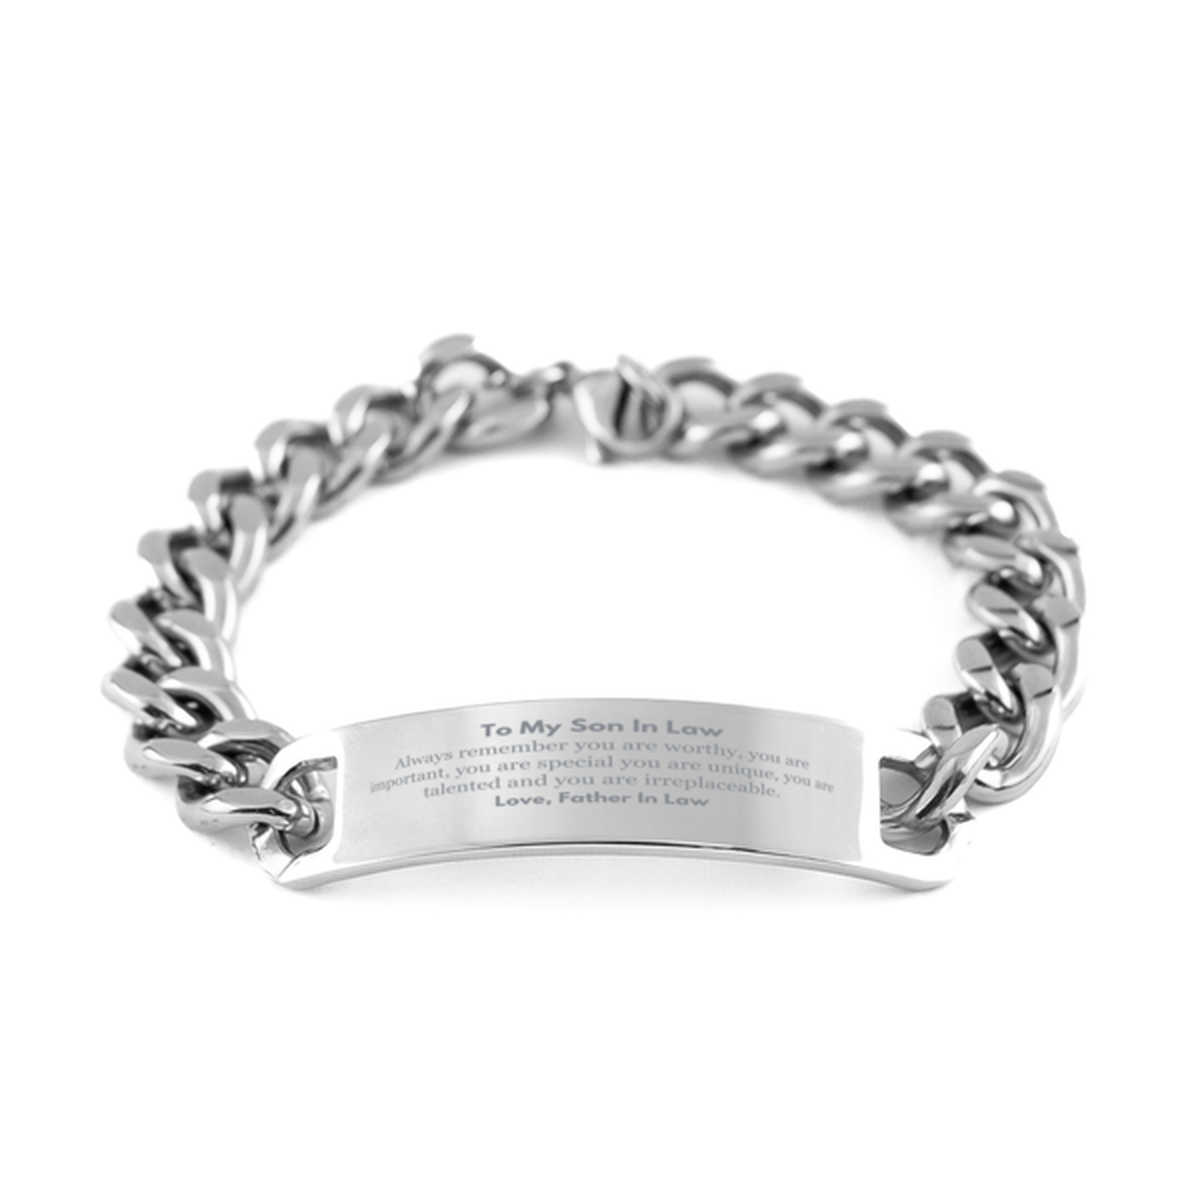 Son In Law Birthday Gifts from Father In Law, Inspirational Cuban Chain Stainless Steel Bracelet for Son In Law Christmas Graduation Gifts for Son In Law Always remember you are worthy, you are important. Love, Father In Law